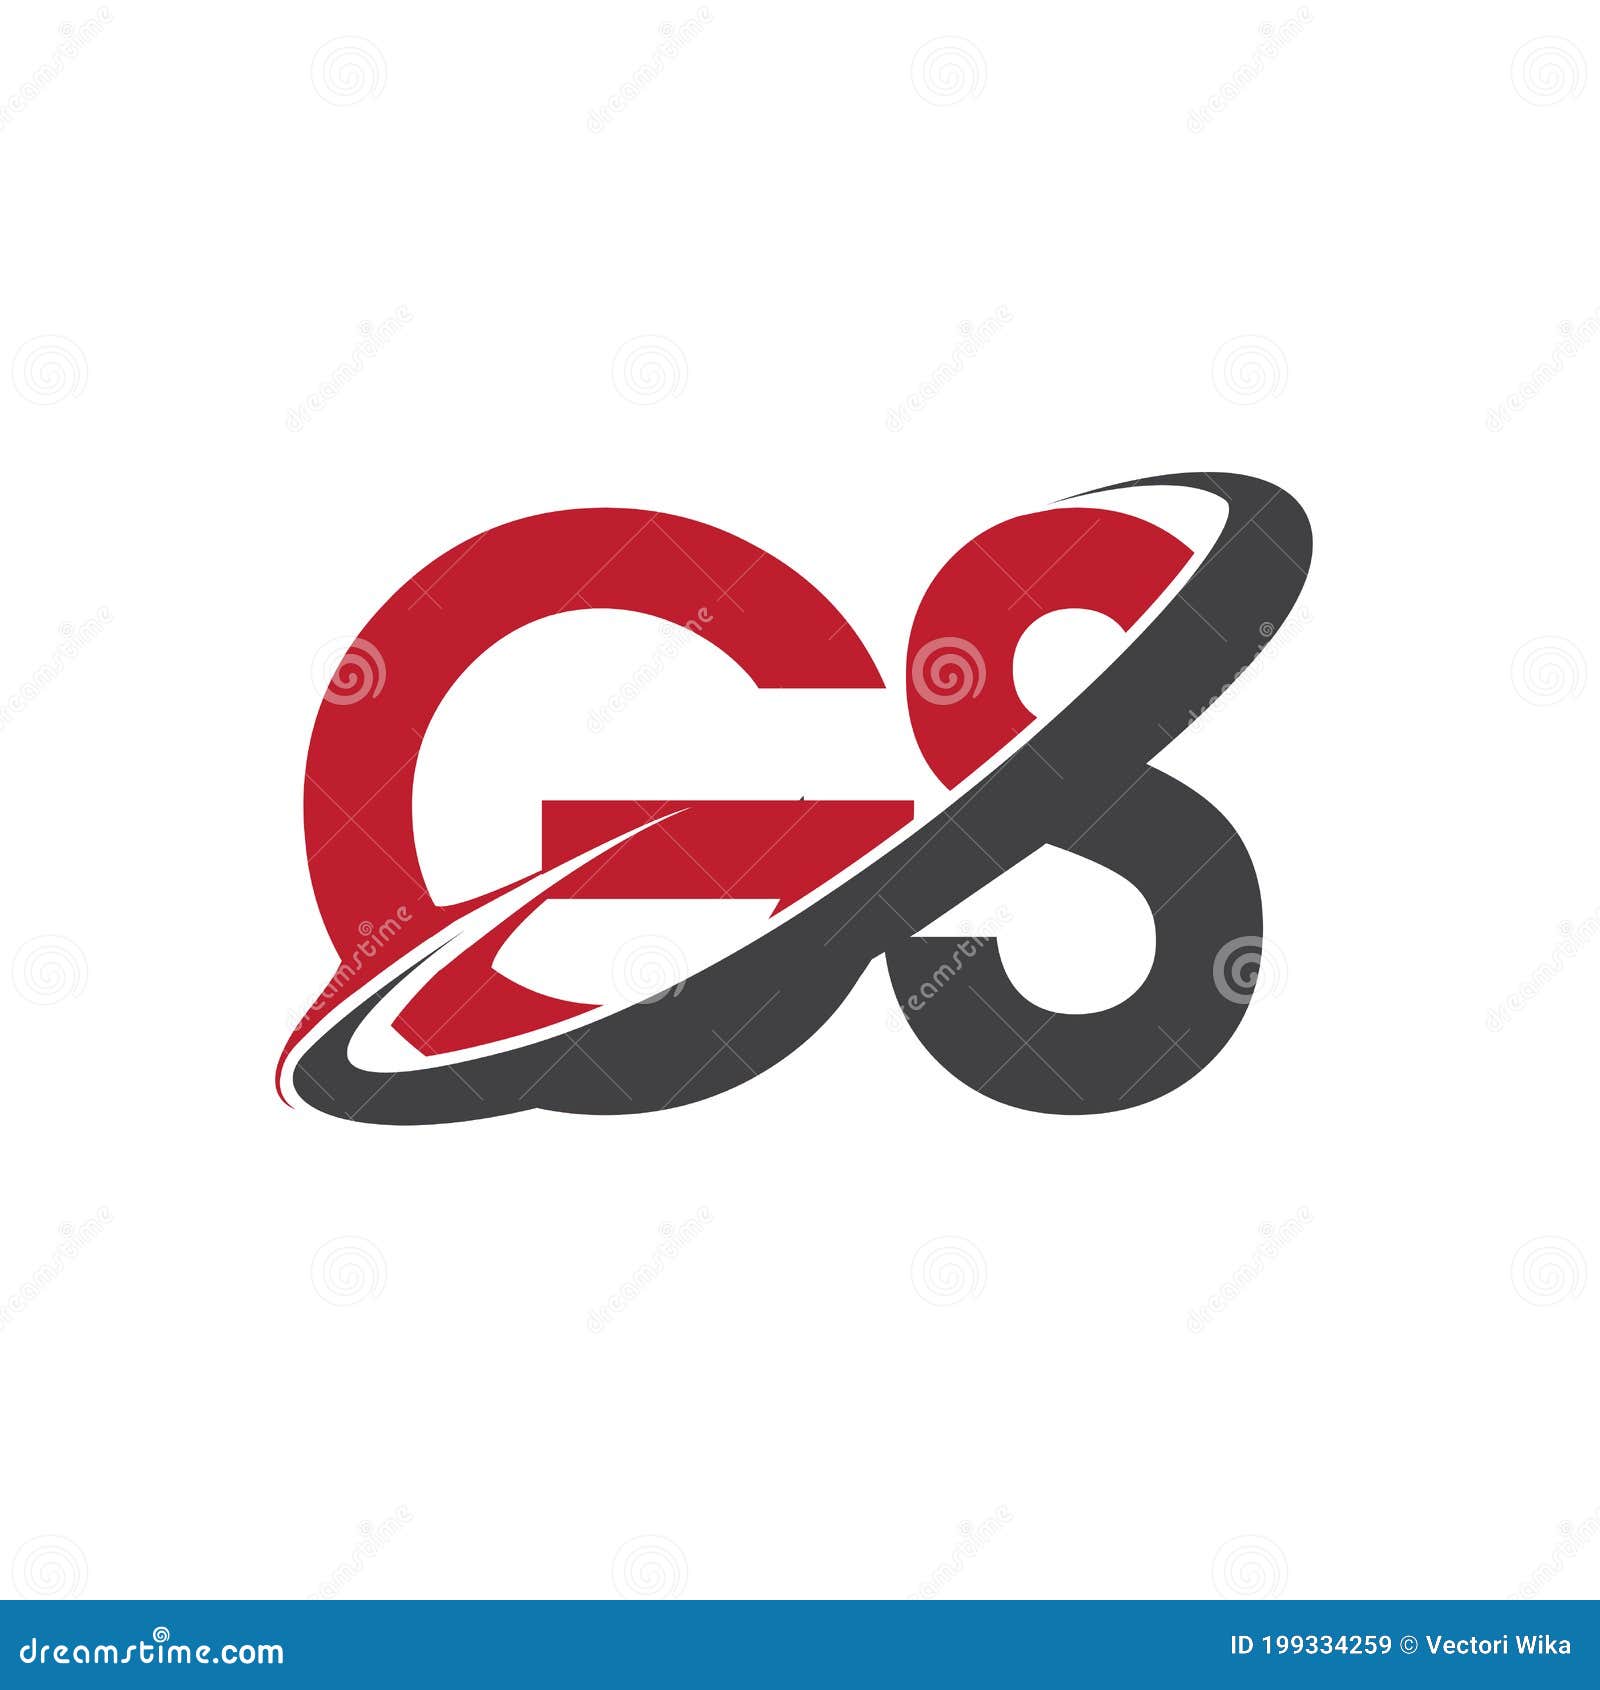 initial letter GS logotype company name colored gold and silver swoosh  design. isolated on black background. | Logotype, Initial letters, Initials